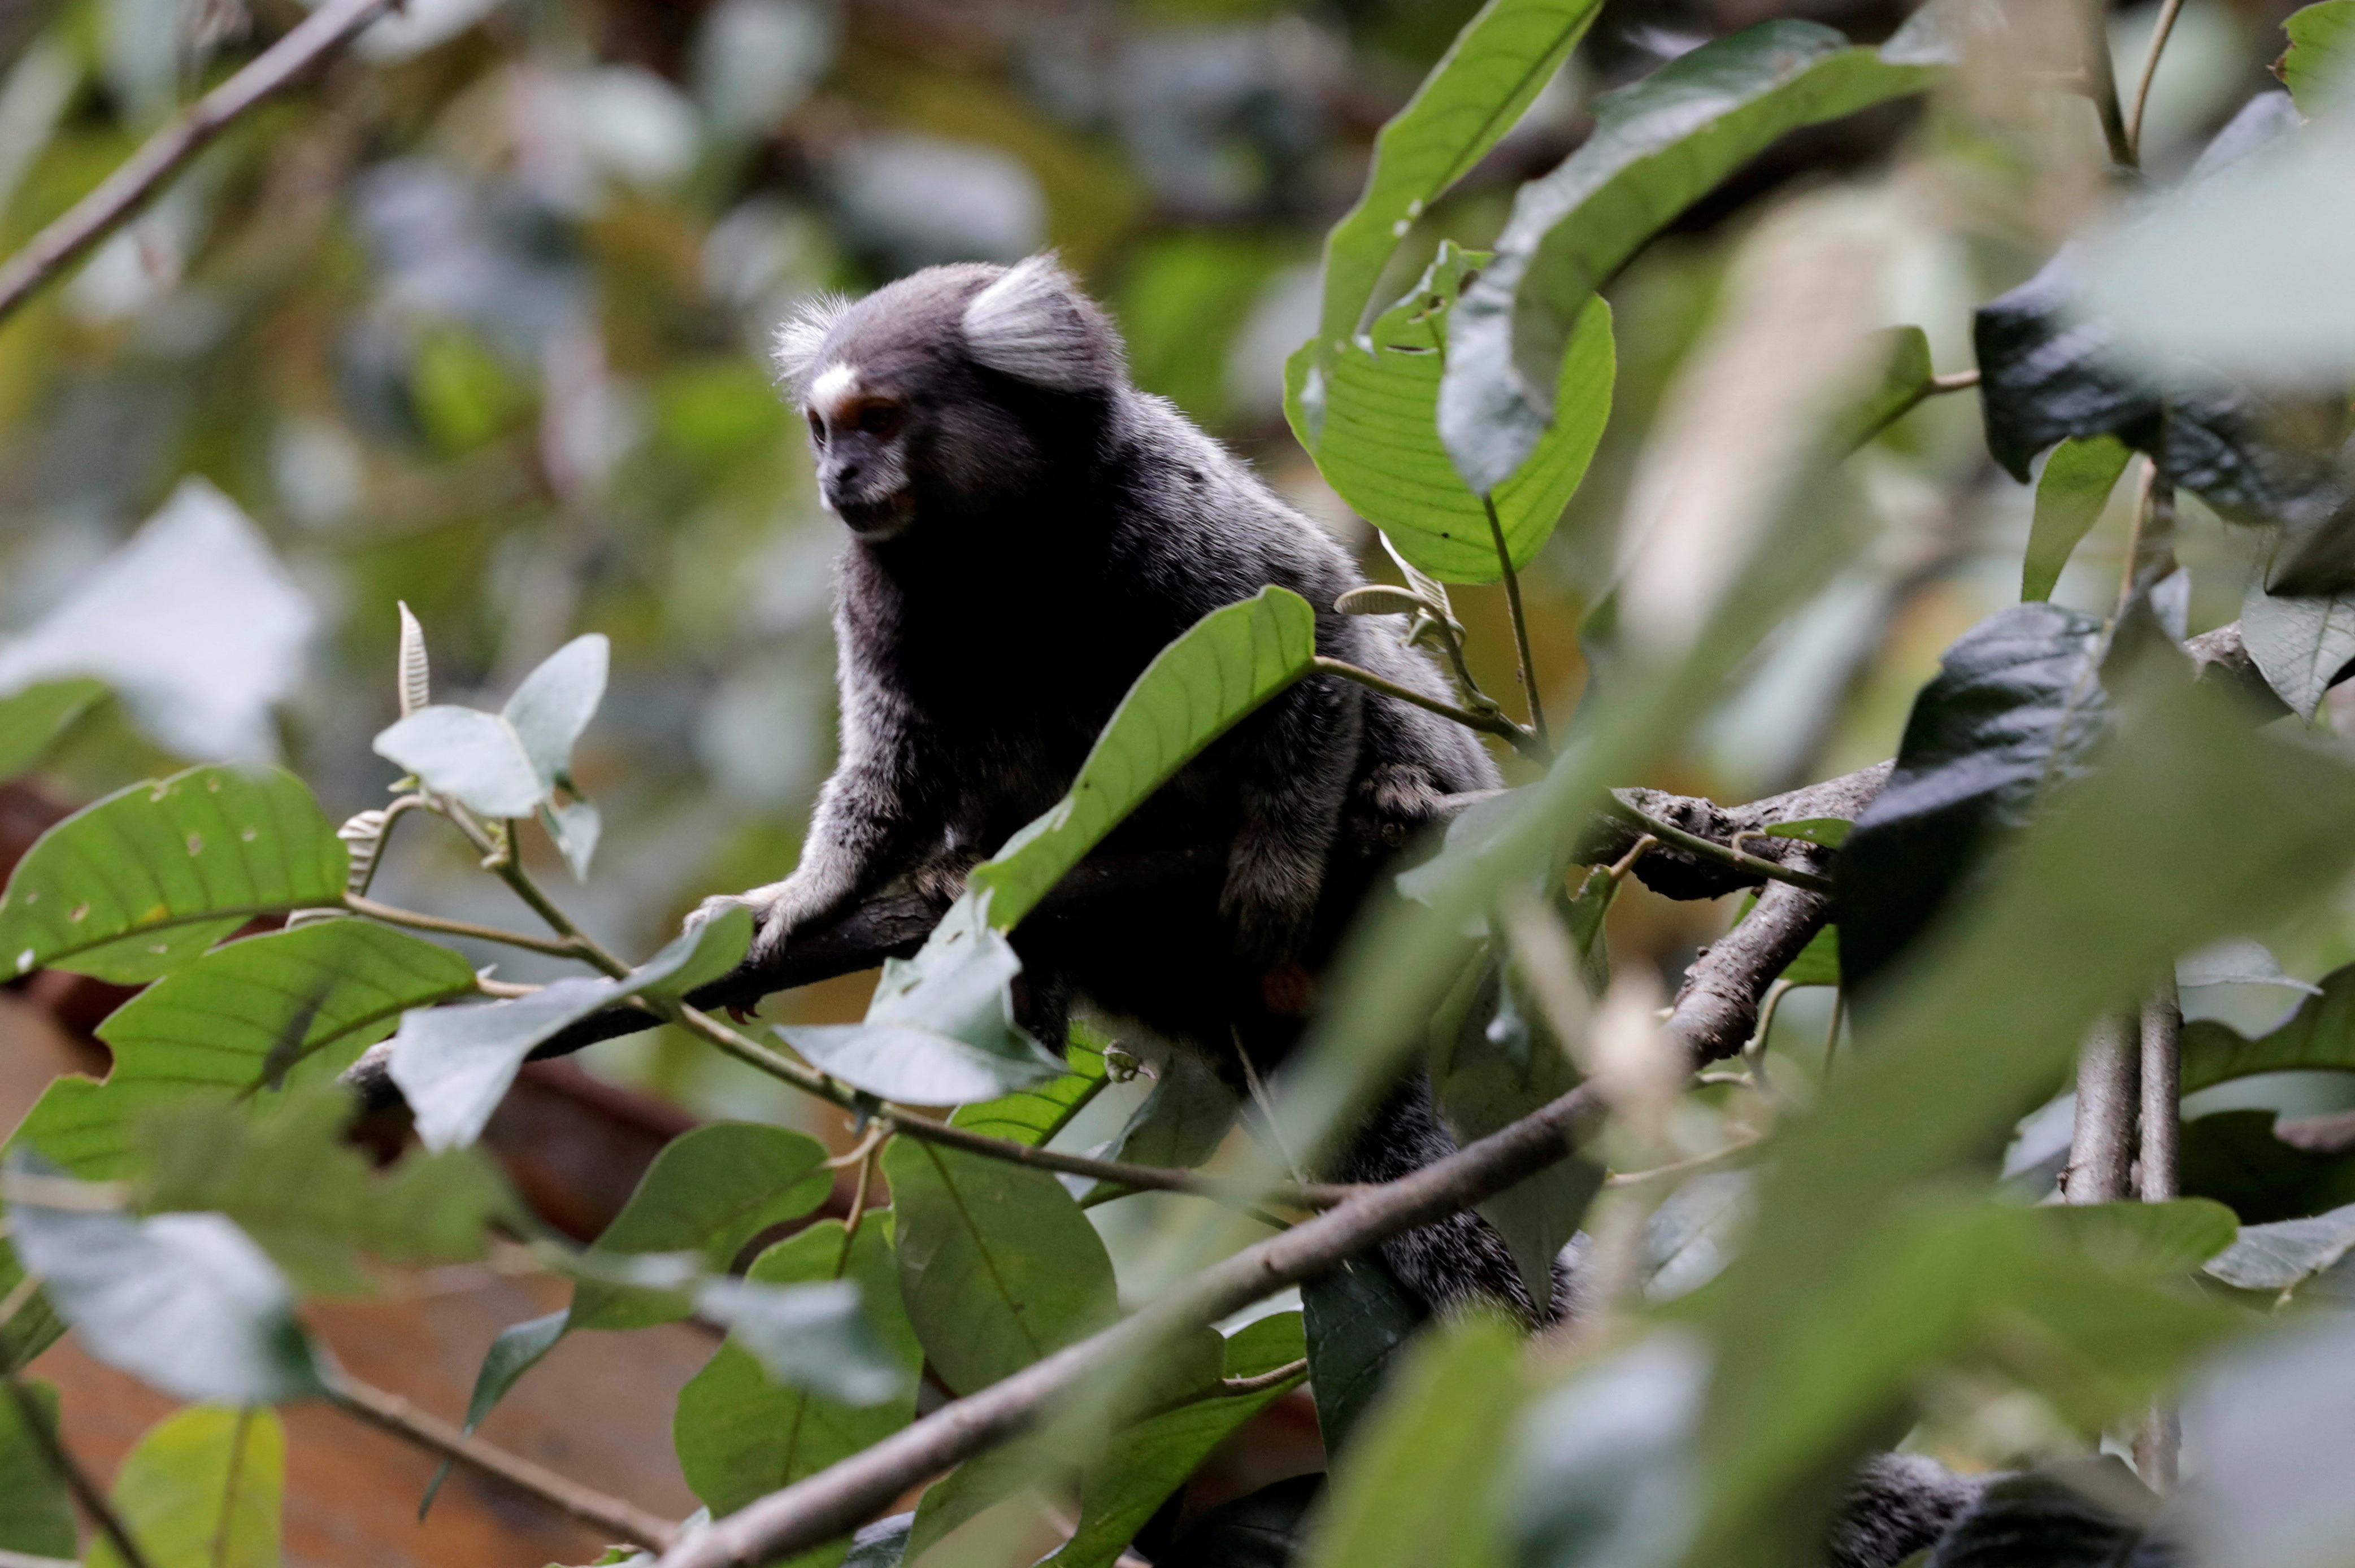 A Callithrix monkey is seen in an Atlantic forest area in Mairipora